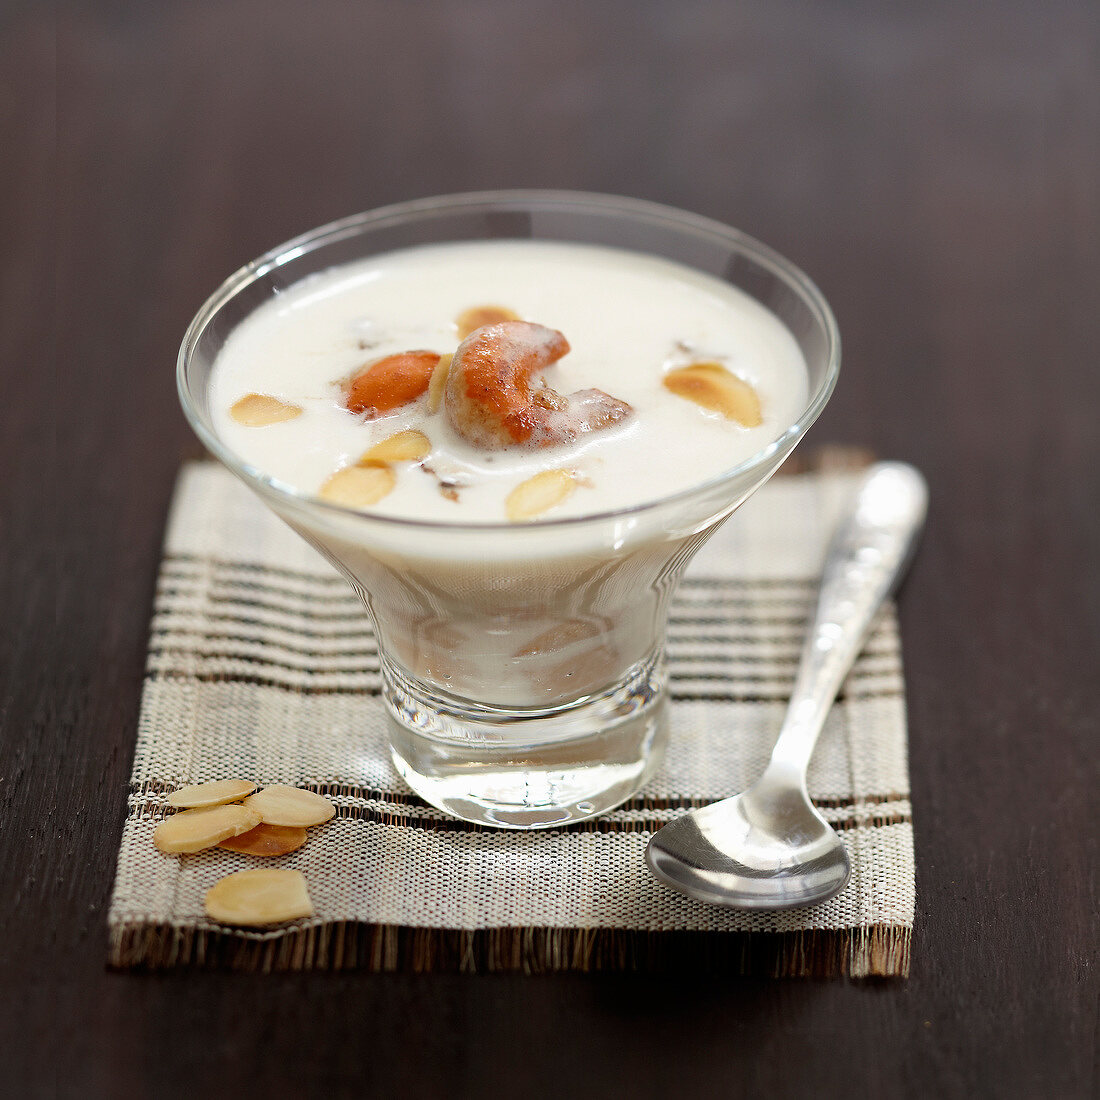 Cream of scallop soup with thinly sliced almonds